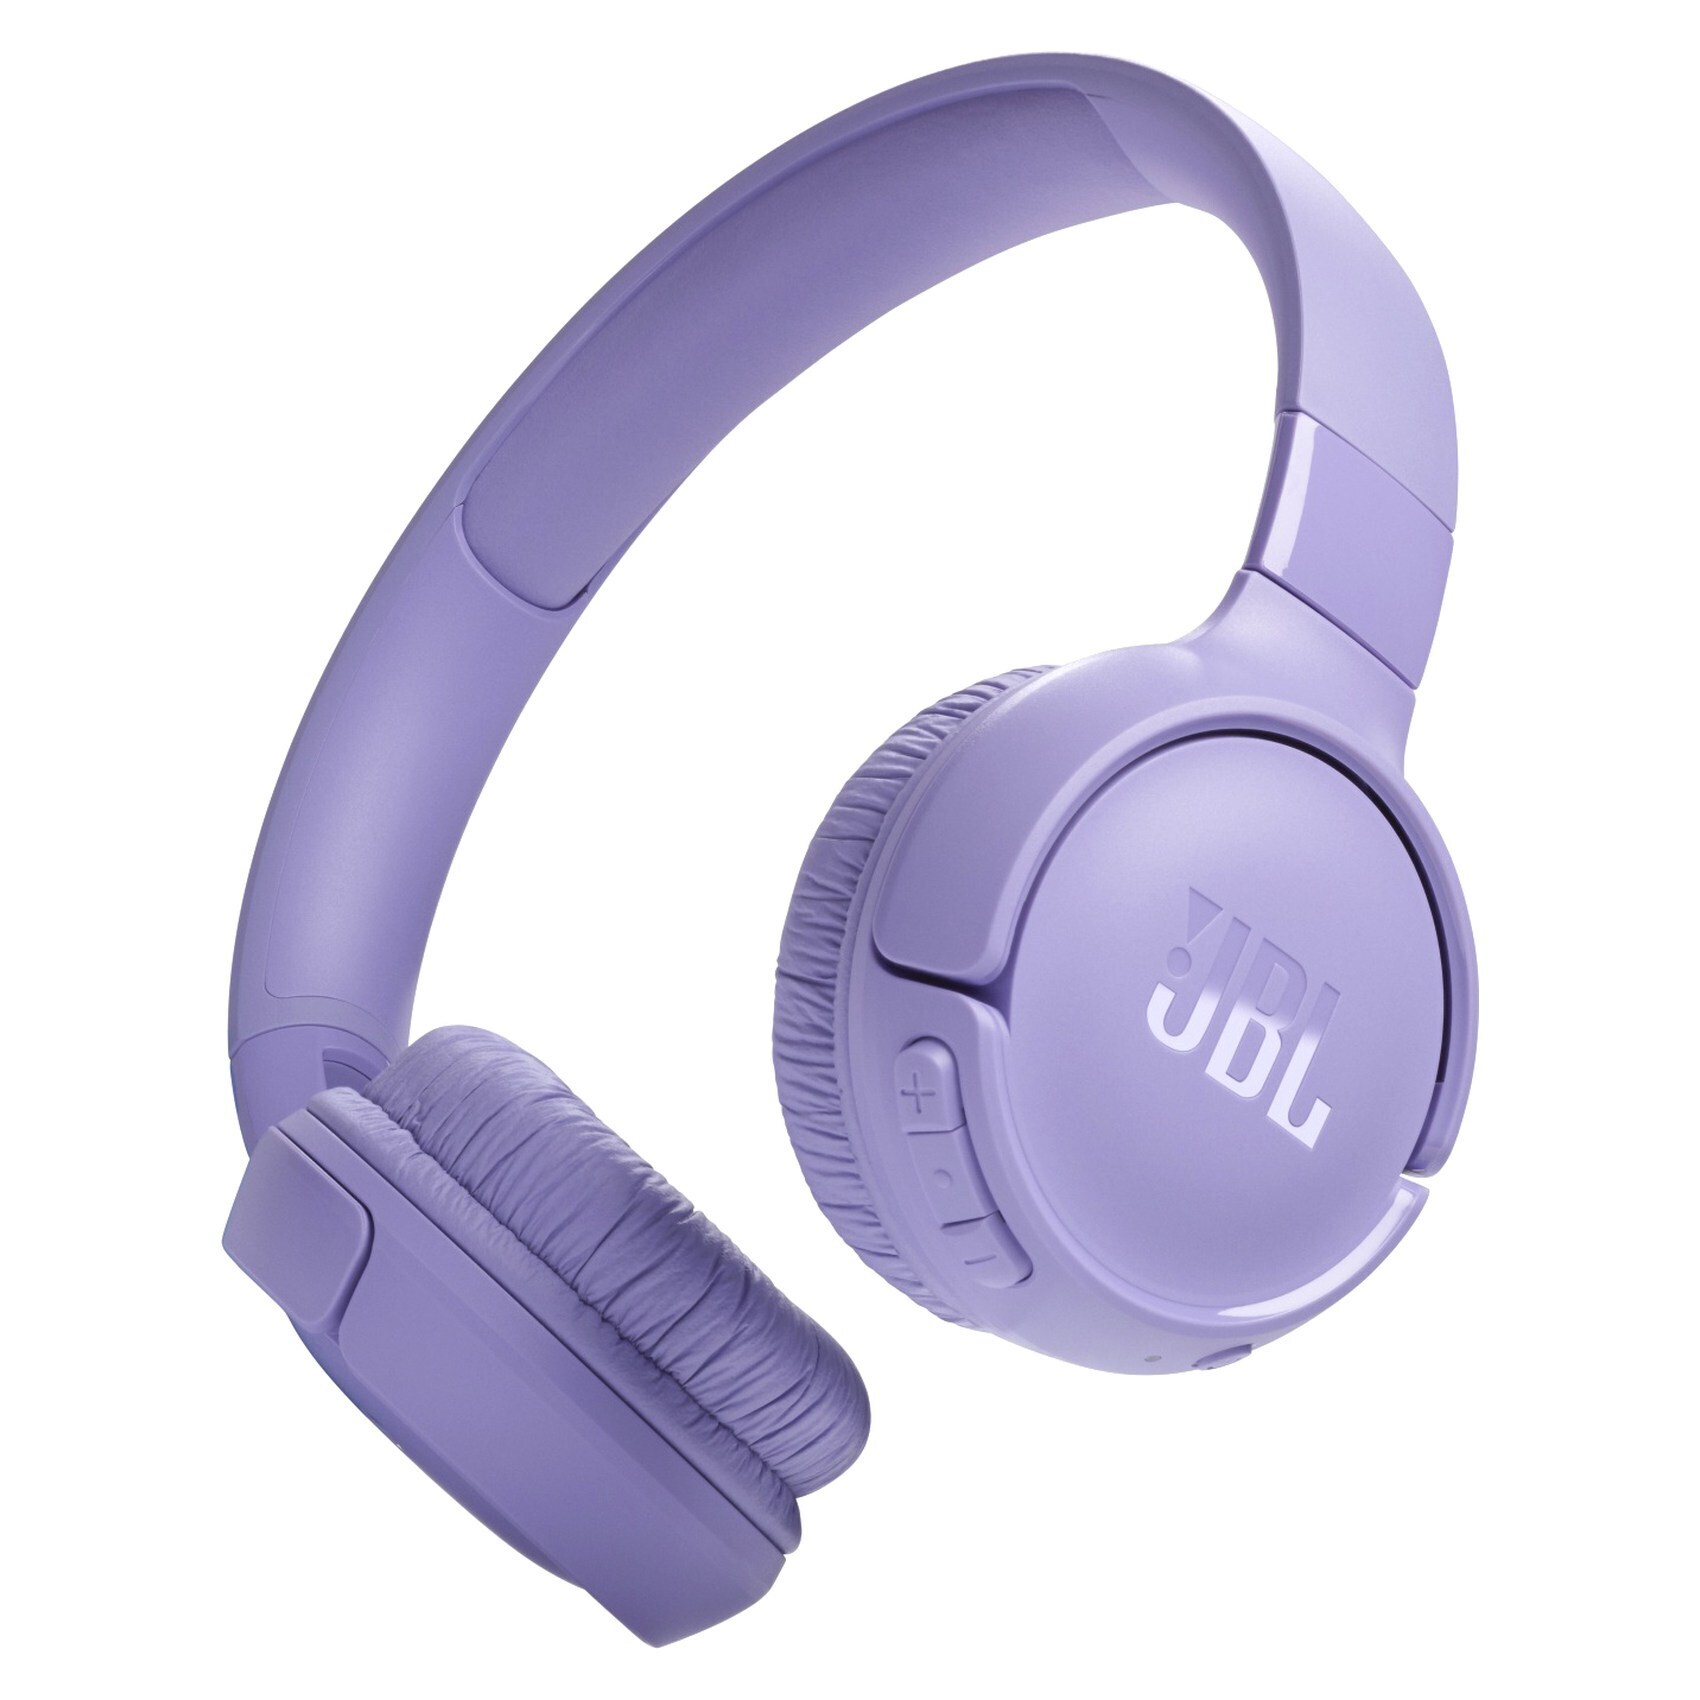 Buy JBL Tune Headphones With Mic Bluetooth Pure Bass Over-Ear Purple Online - Shop Smartphones, Tablets & Wearables on UAE